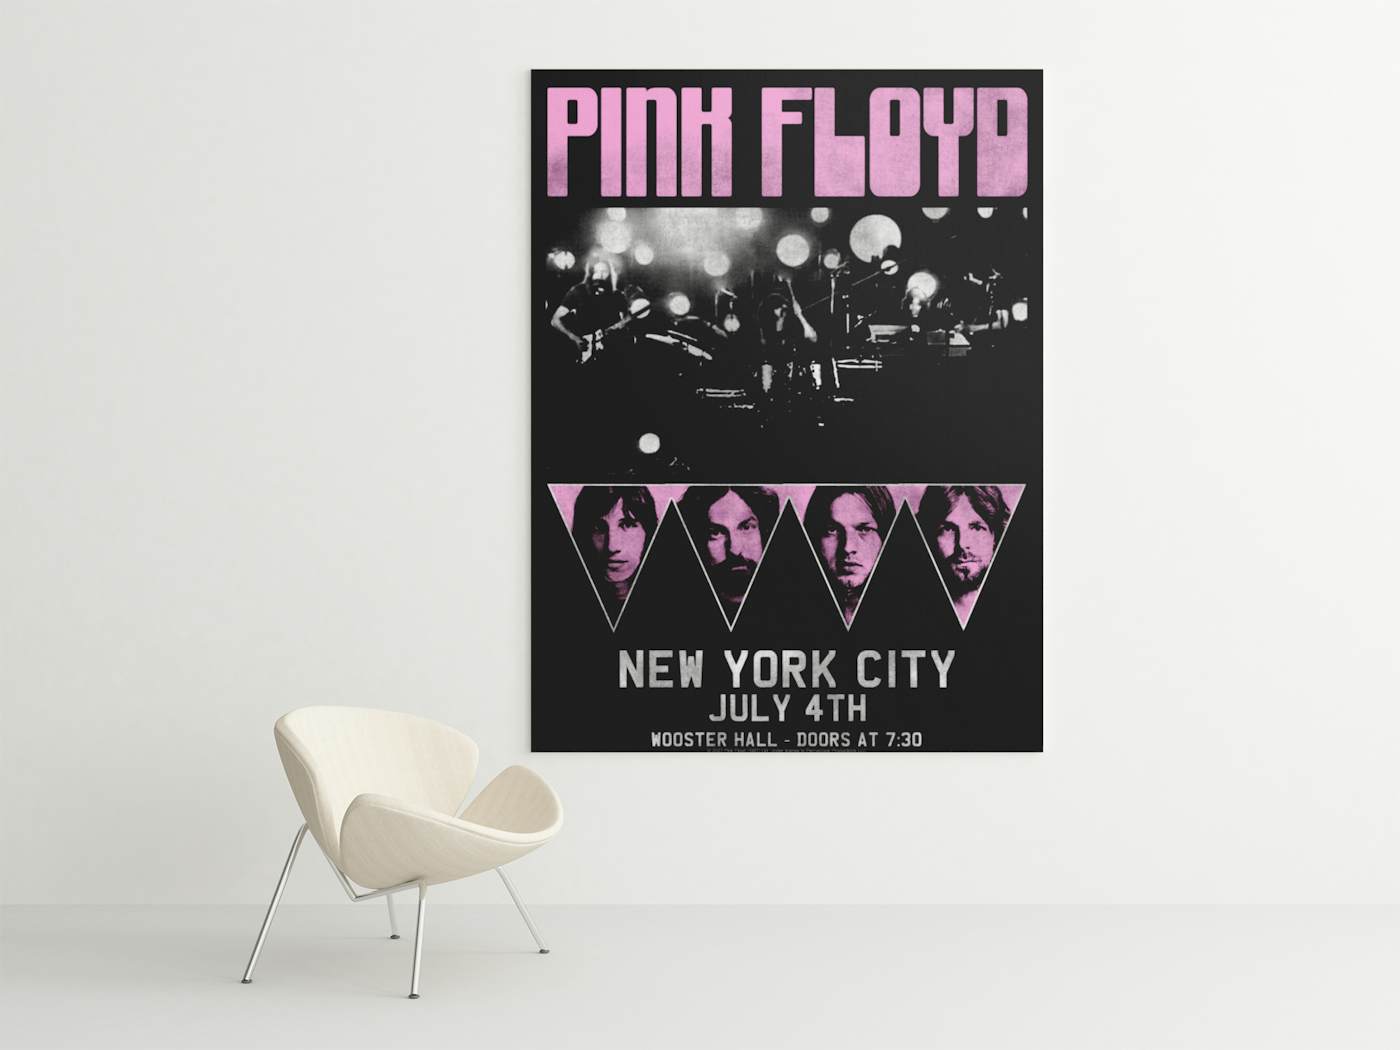 Pink Floyd The Wall Vintage Vinyl Record Art 12” Inch For Wall Art Rock &  Roll Music Home Decor